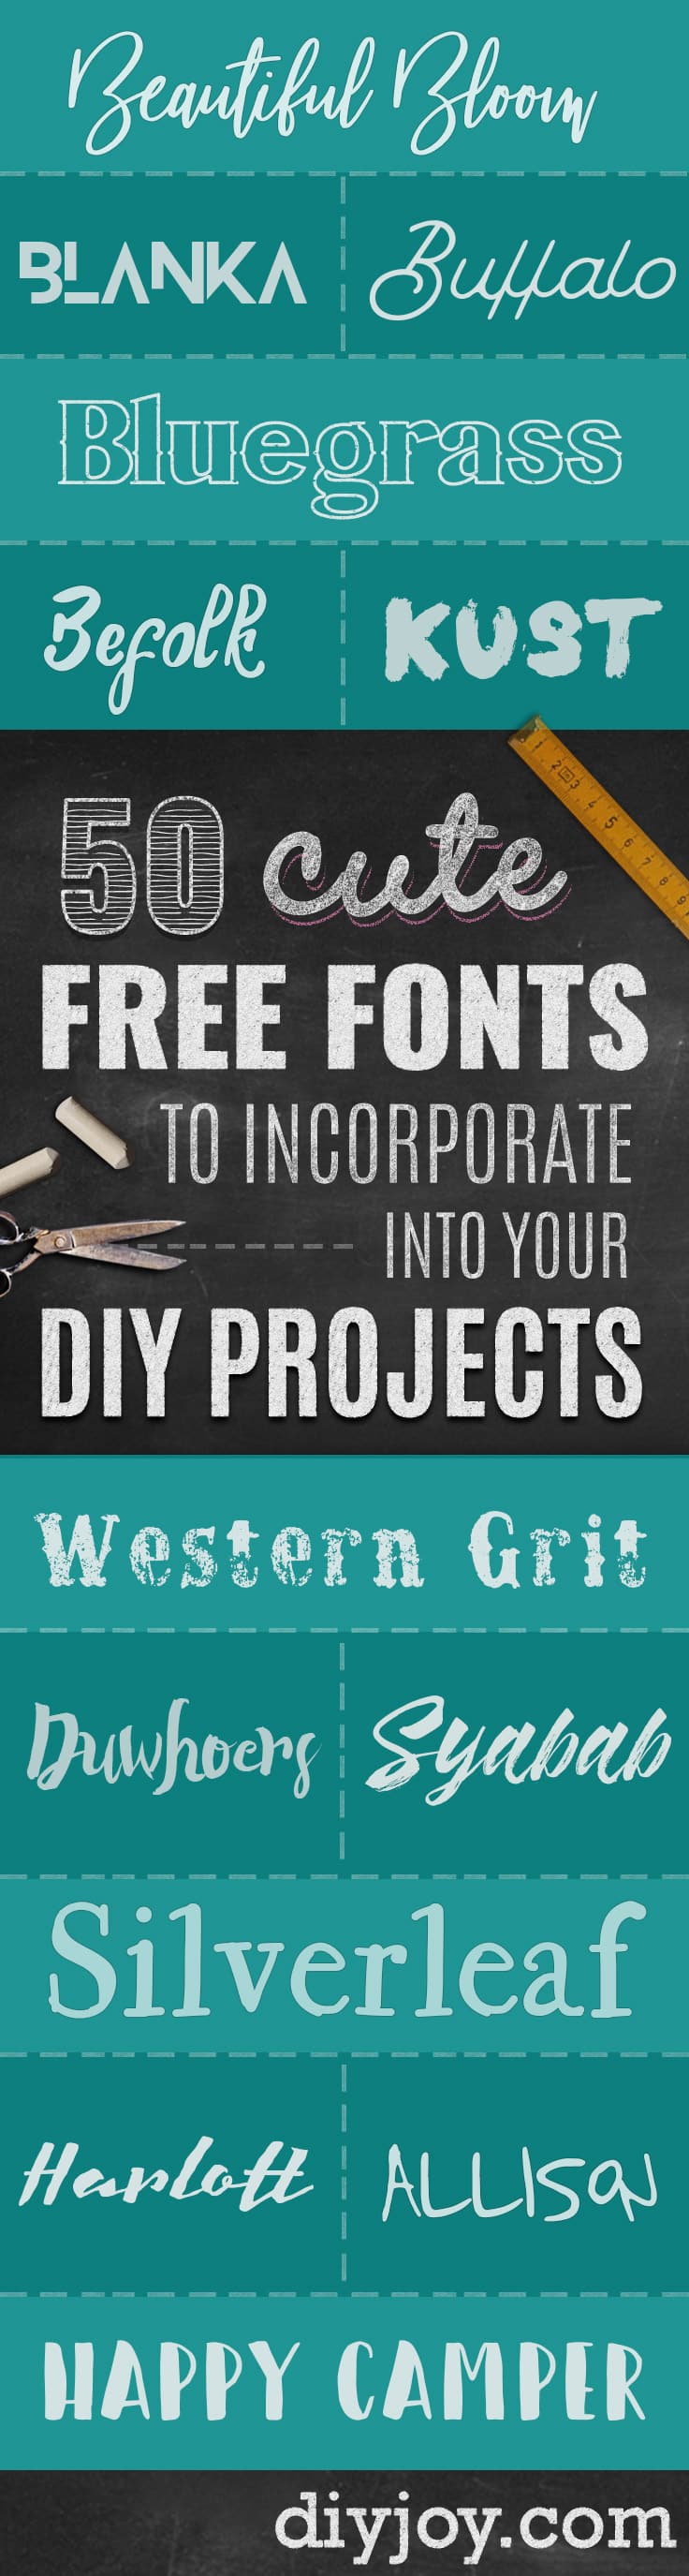 Free Fonts - Best Free Fonts to Download - Downloadable Font Ideas, Handwriting, Script, Farmhouse, Elegant, Rustic, ALL CAPS, DIY Projects and Crafts